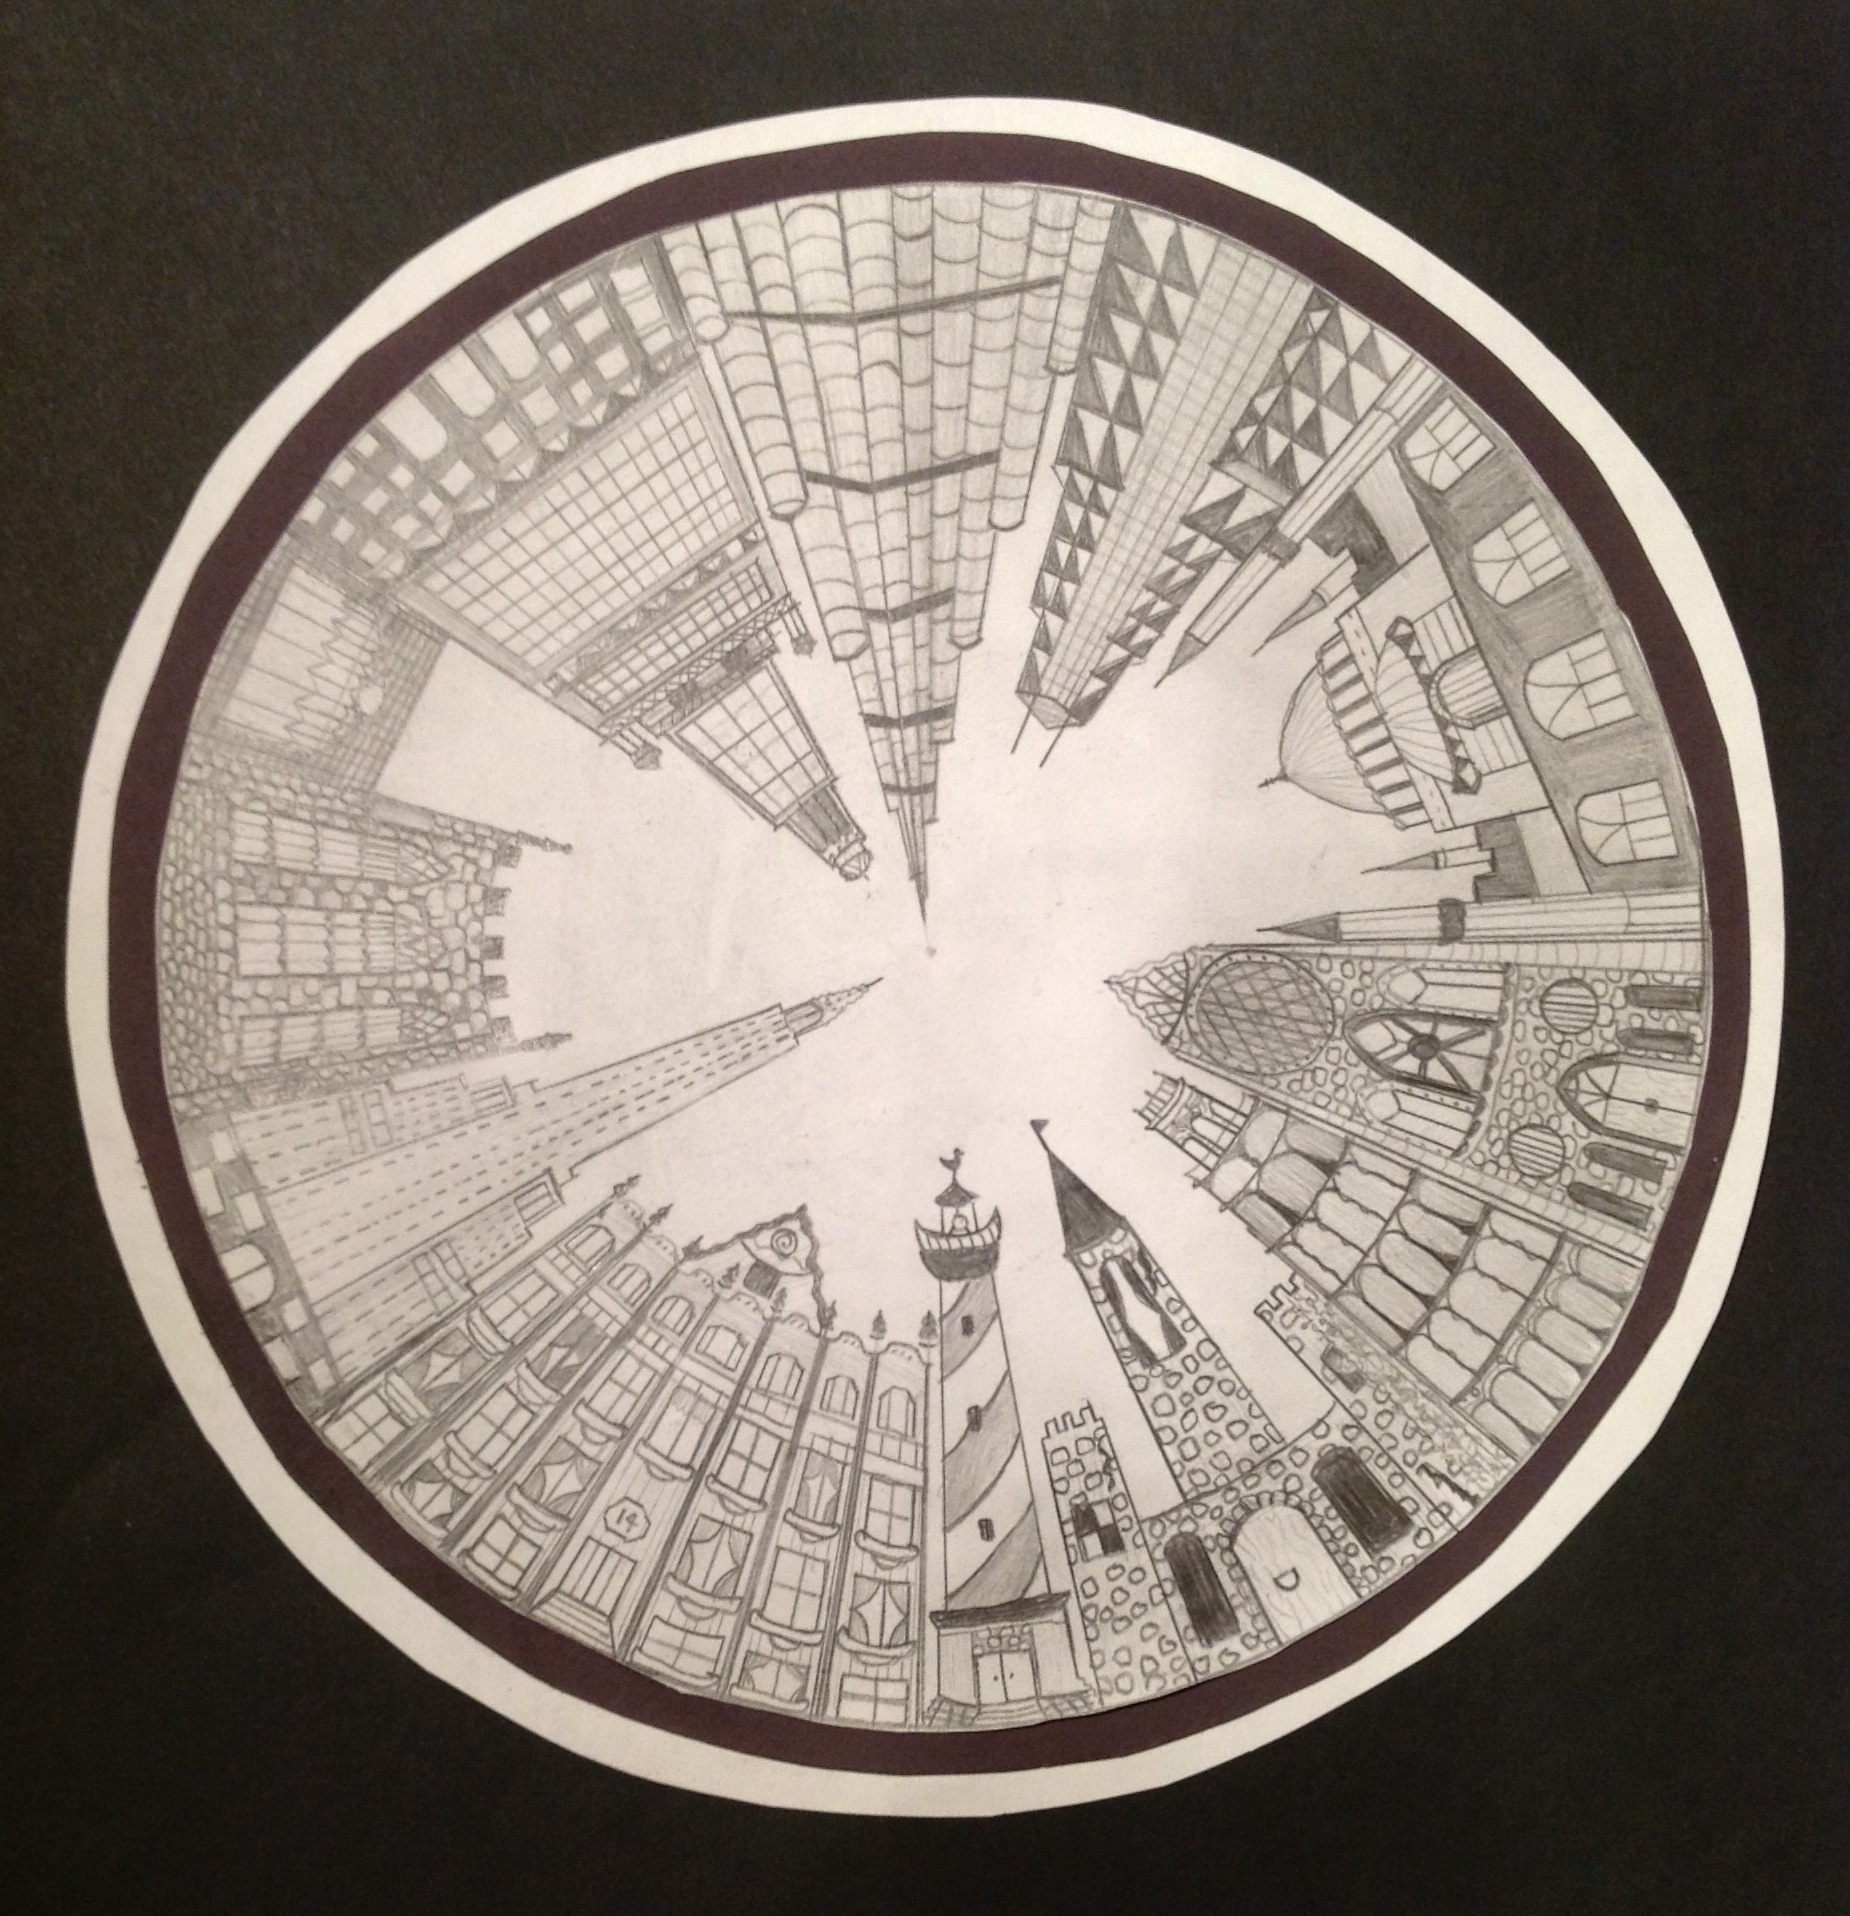 1 point perspective city